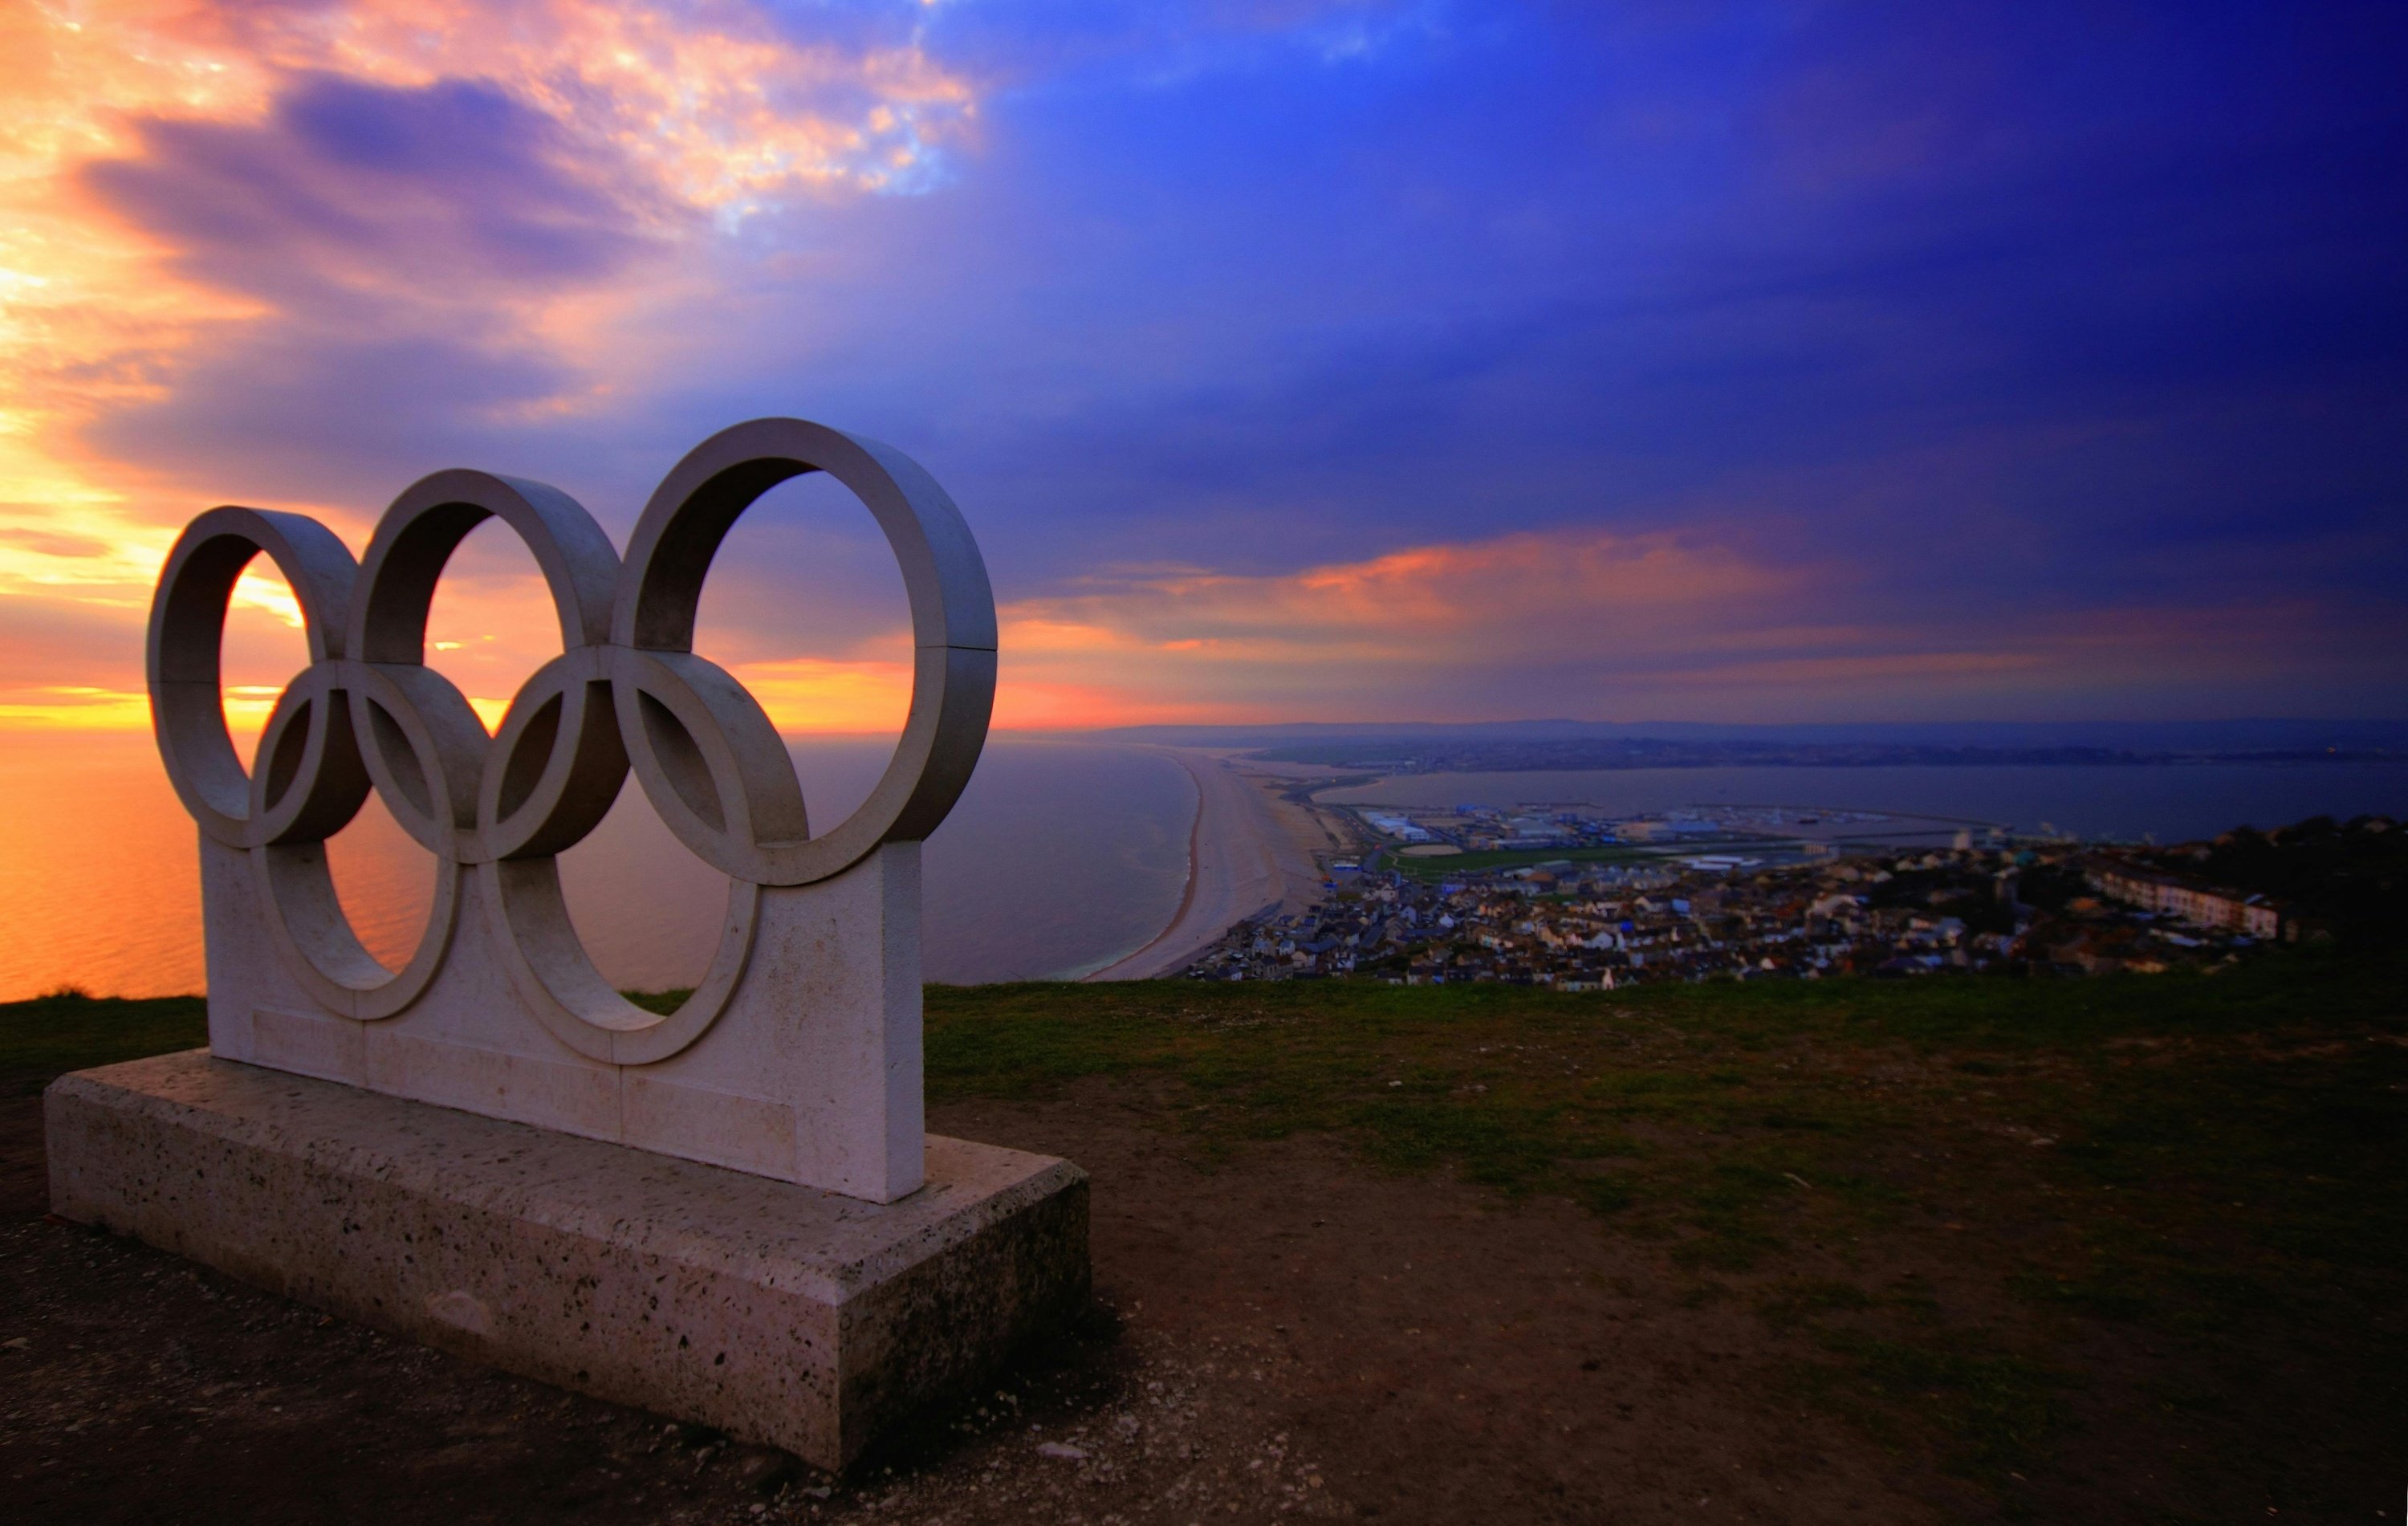 A summer of Olympic Games Paris 2024